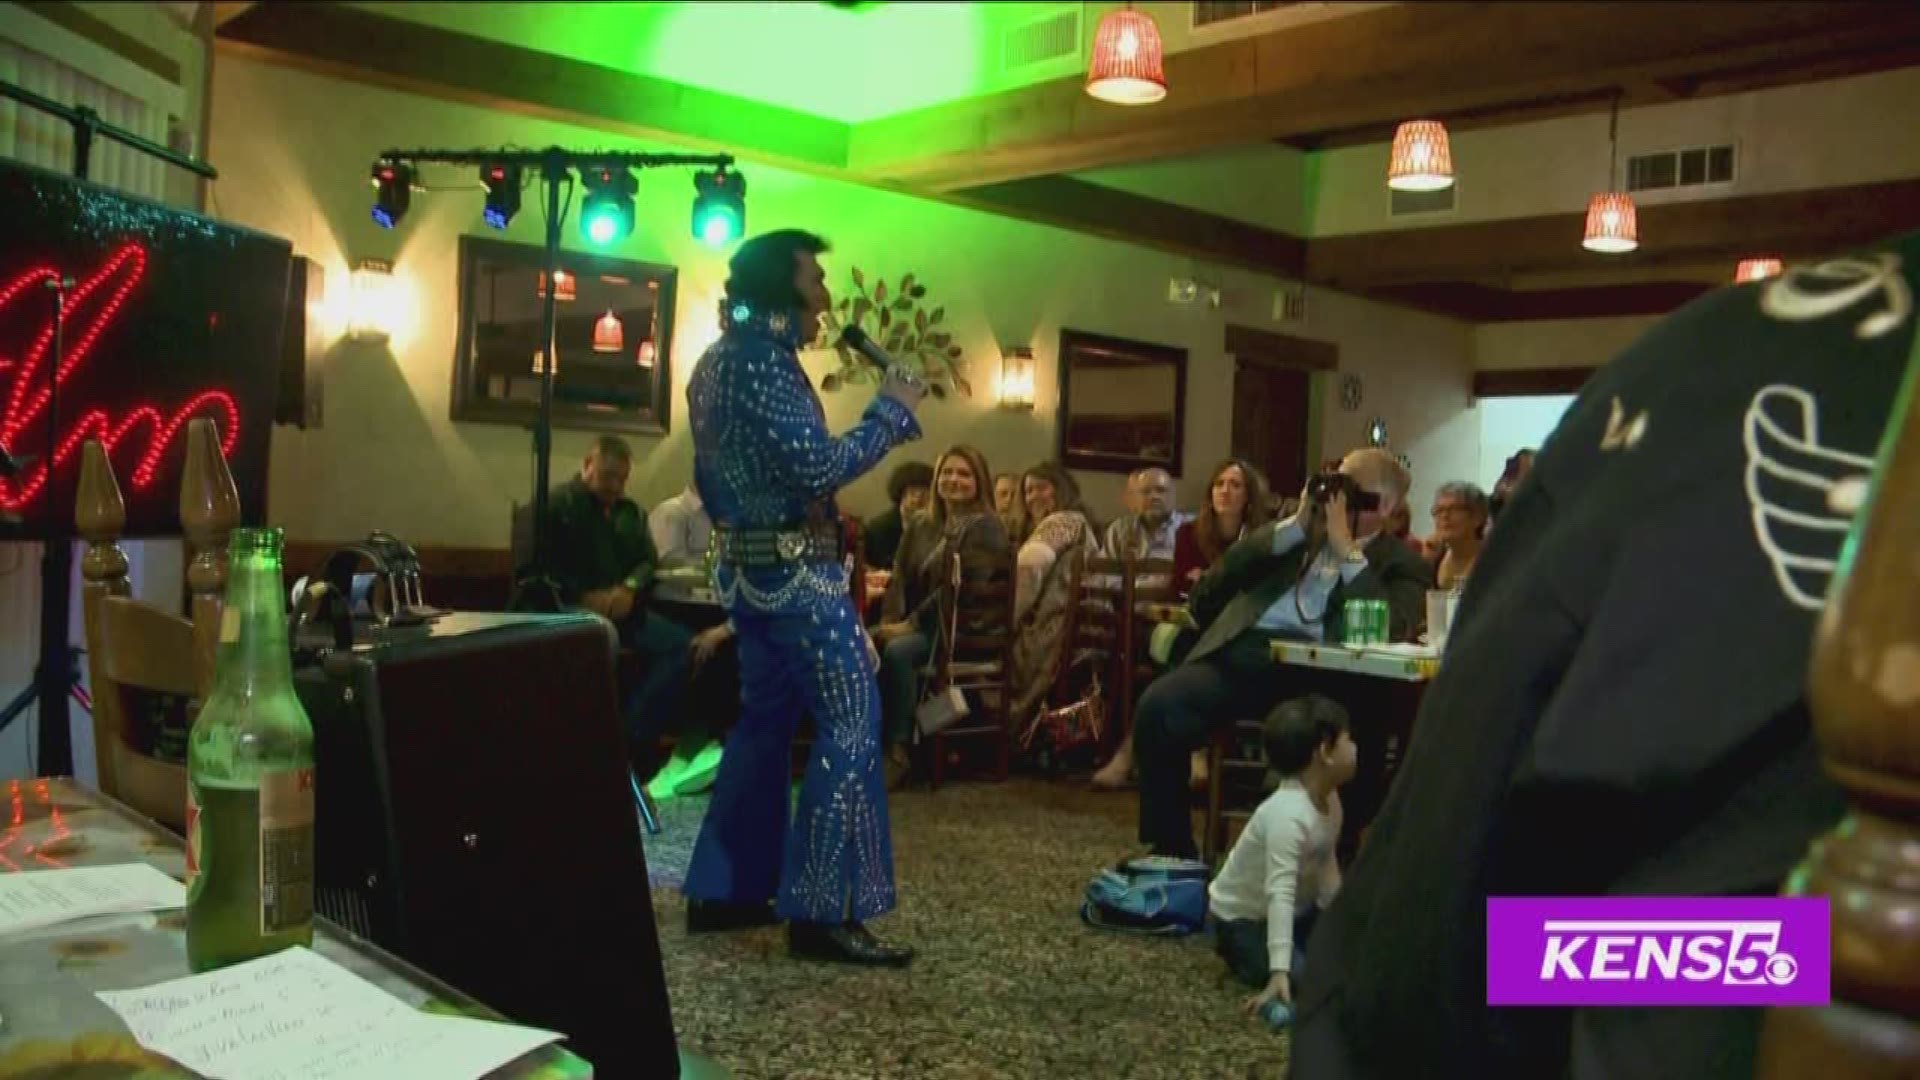 Elvis impersonator with an amazing story